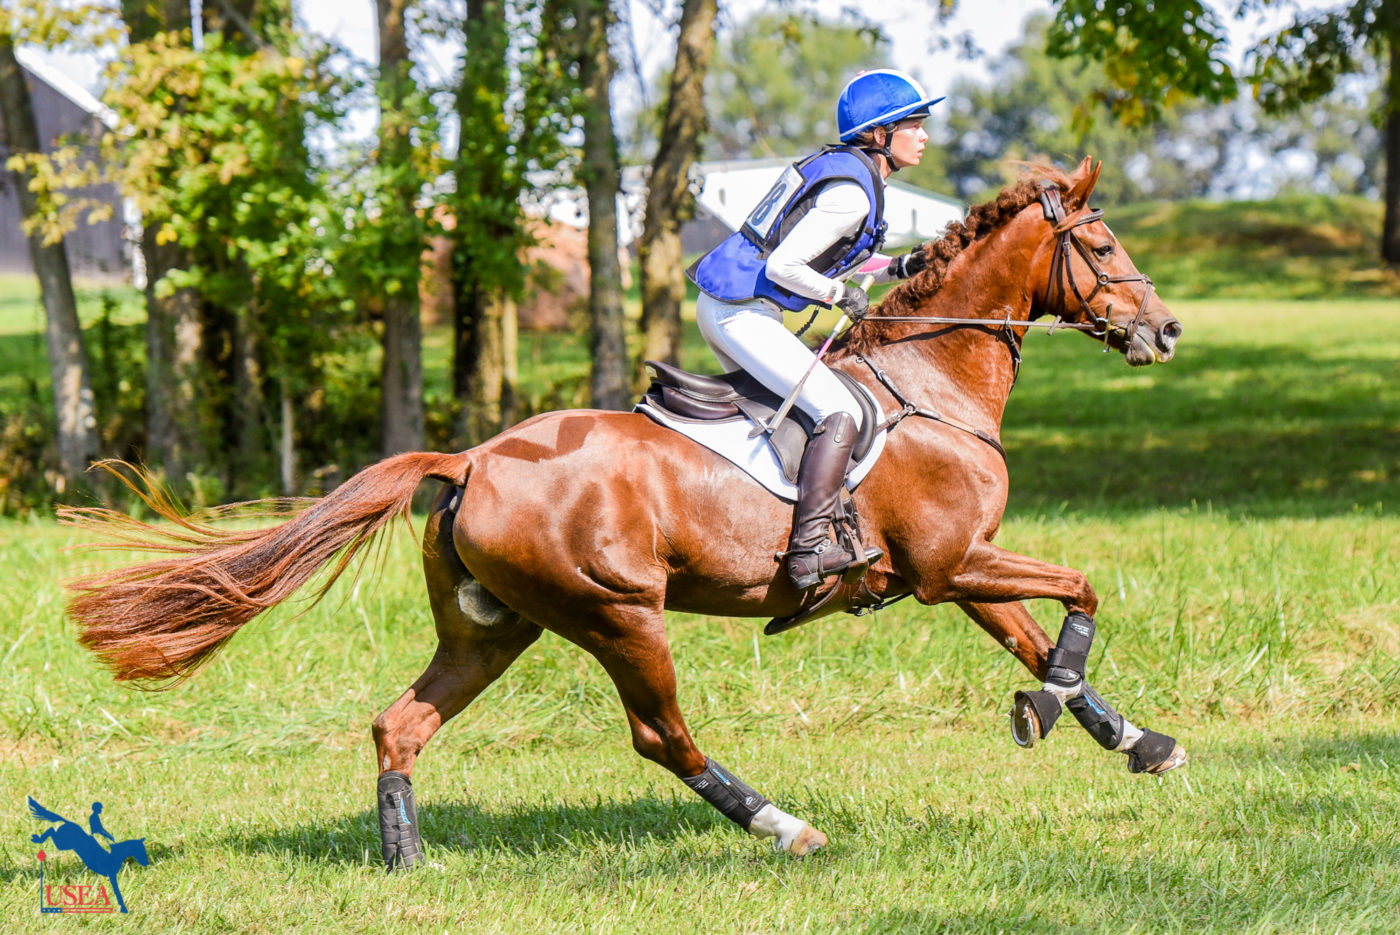 There's something about a chestnut's coat shining like a copper penny! USEA/Leslie Mintz Photo.